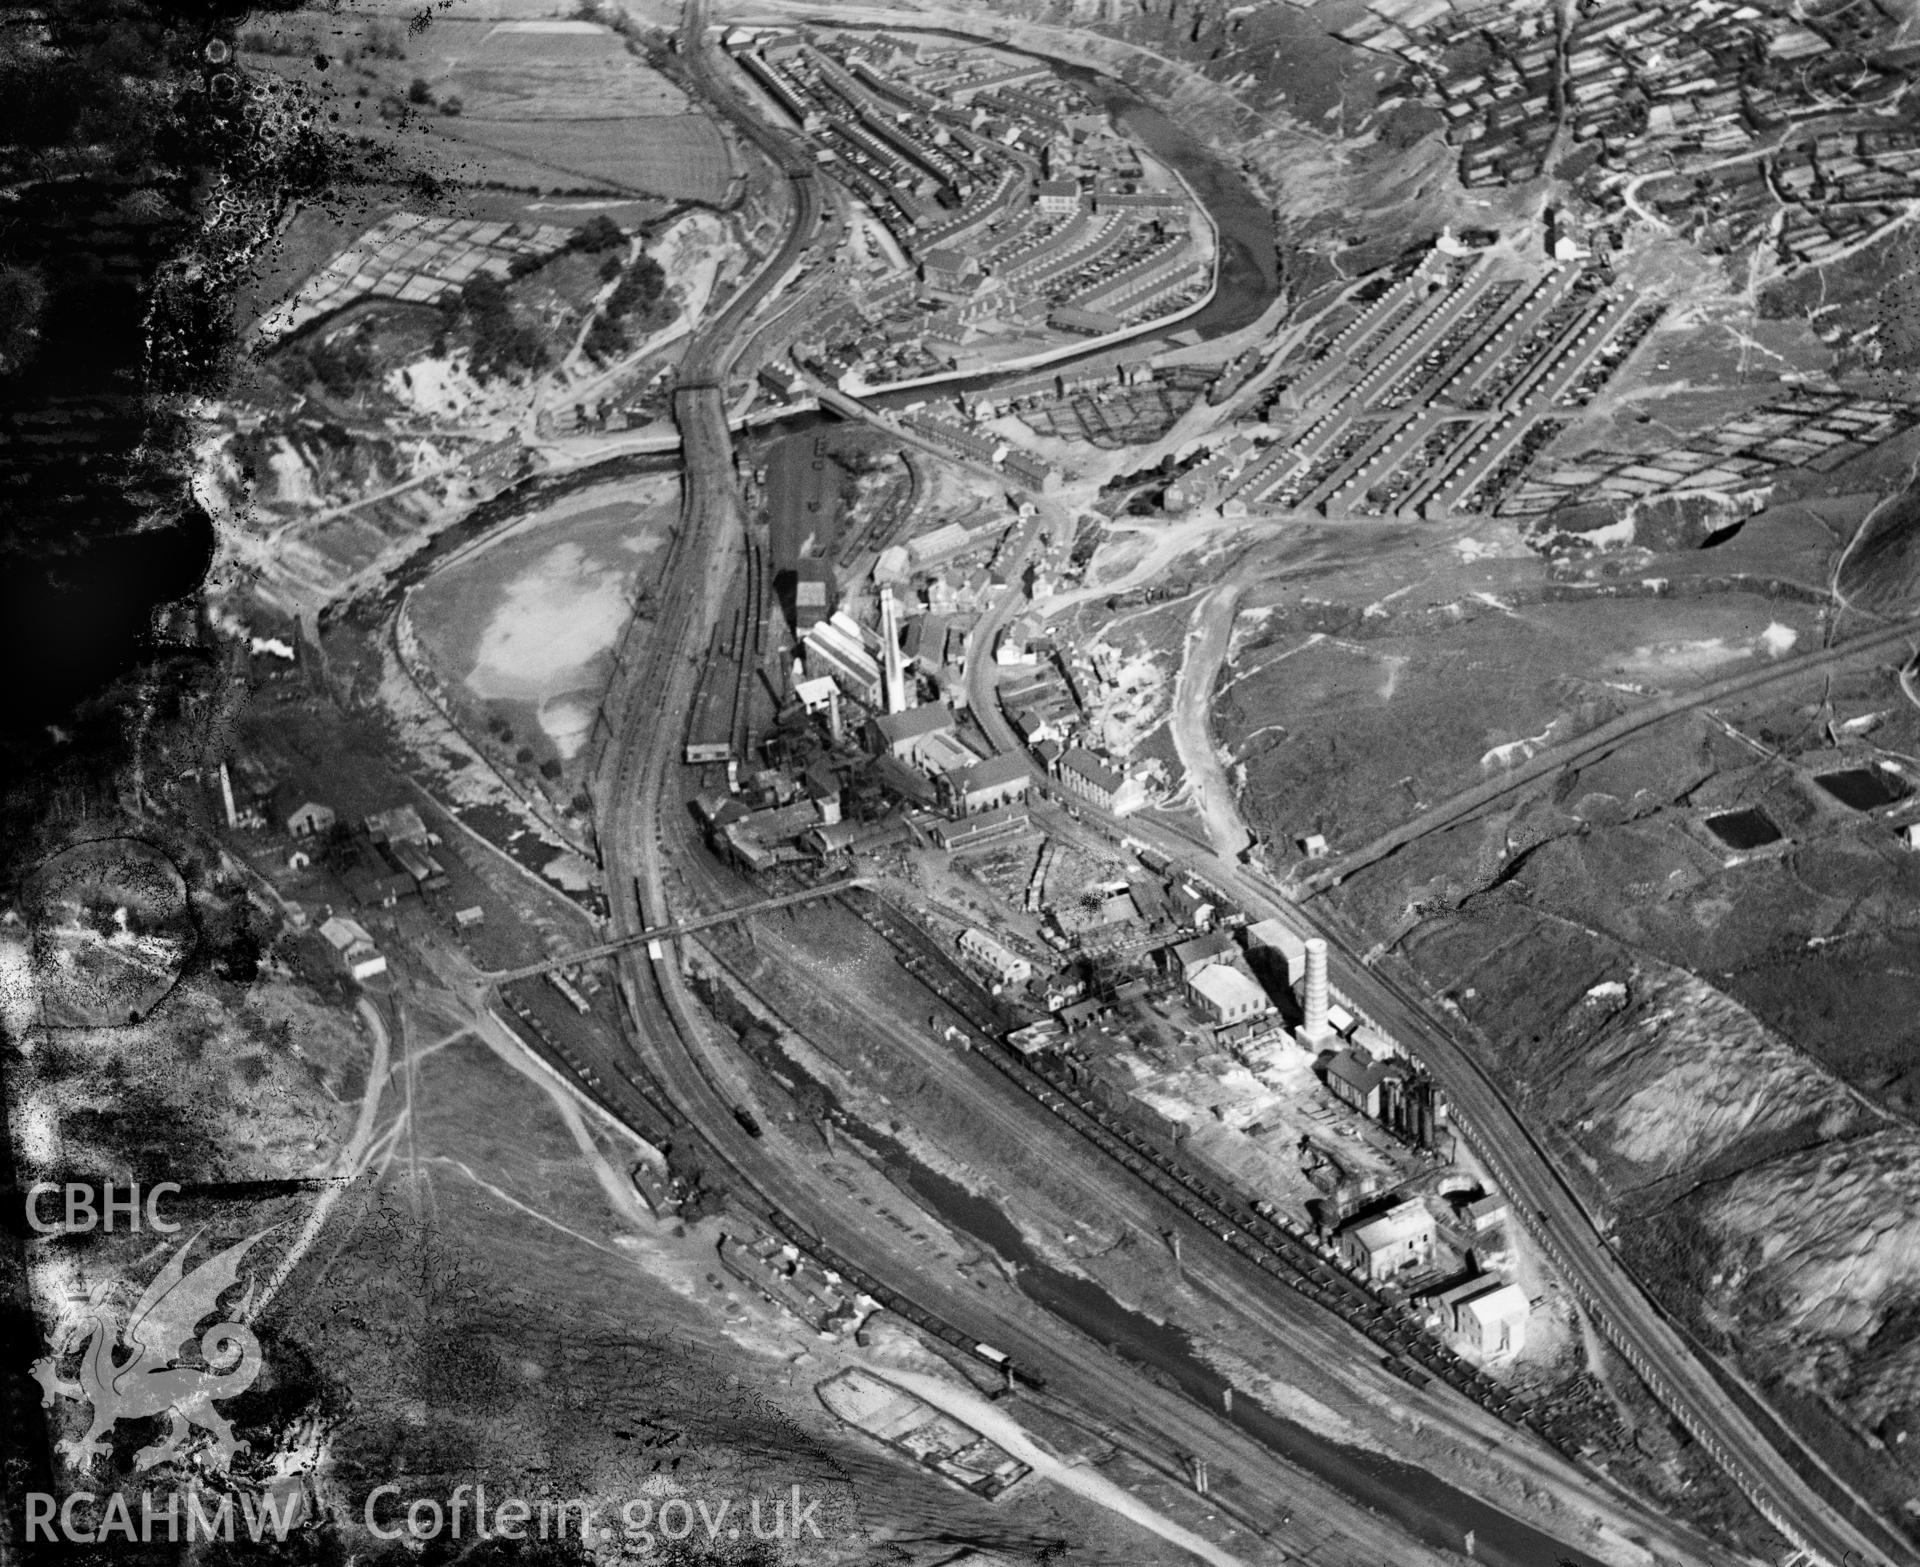 View of Lewis Merthyr Colliery, Hafod looking from west, oblique aerial view. 5?x4? black and white glass plate negative.